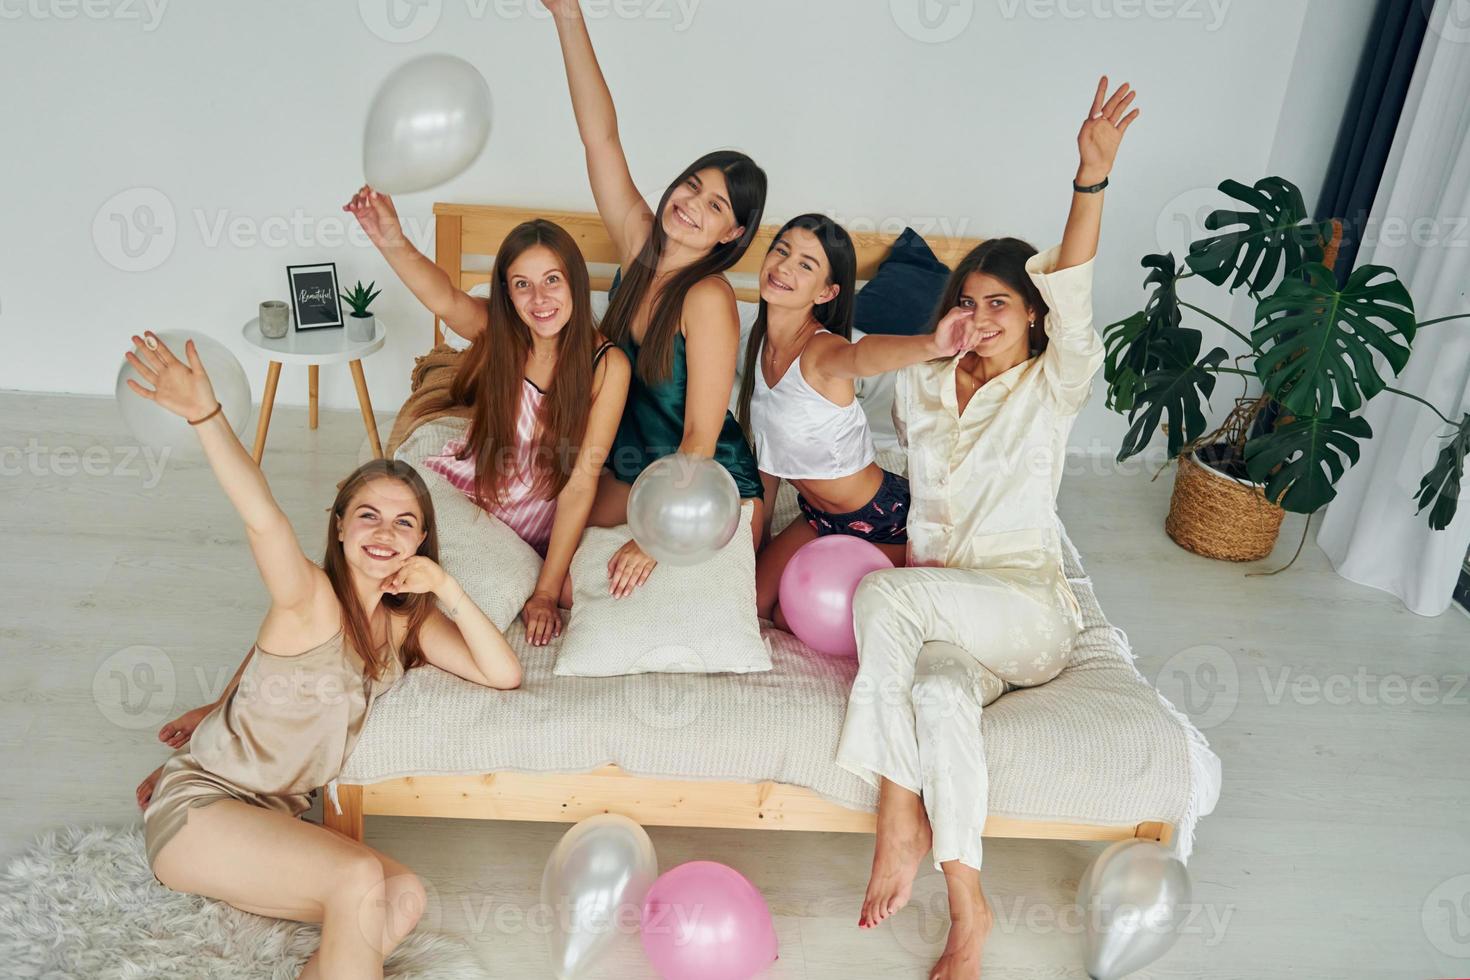 Party with baloons. Group of happy women that is at a bachelorette photo